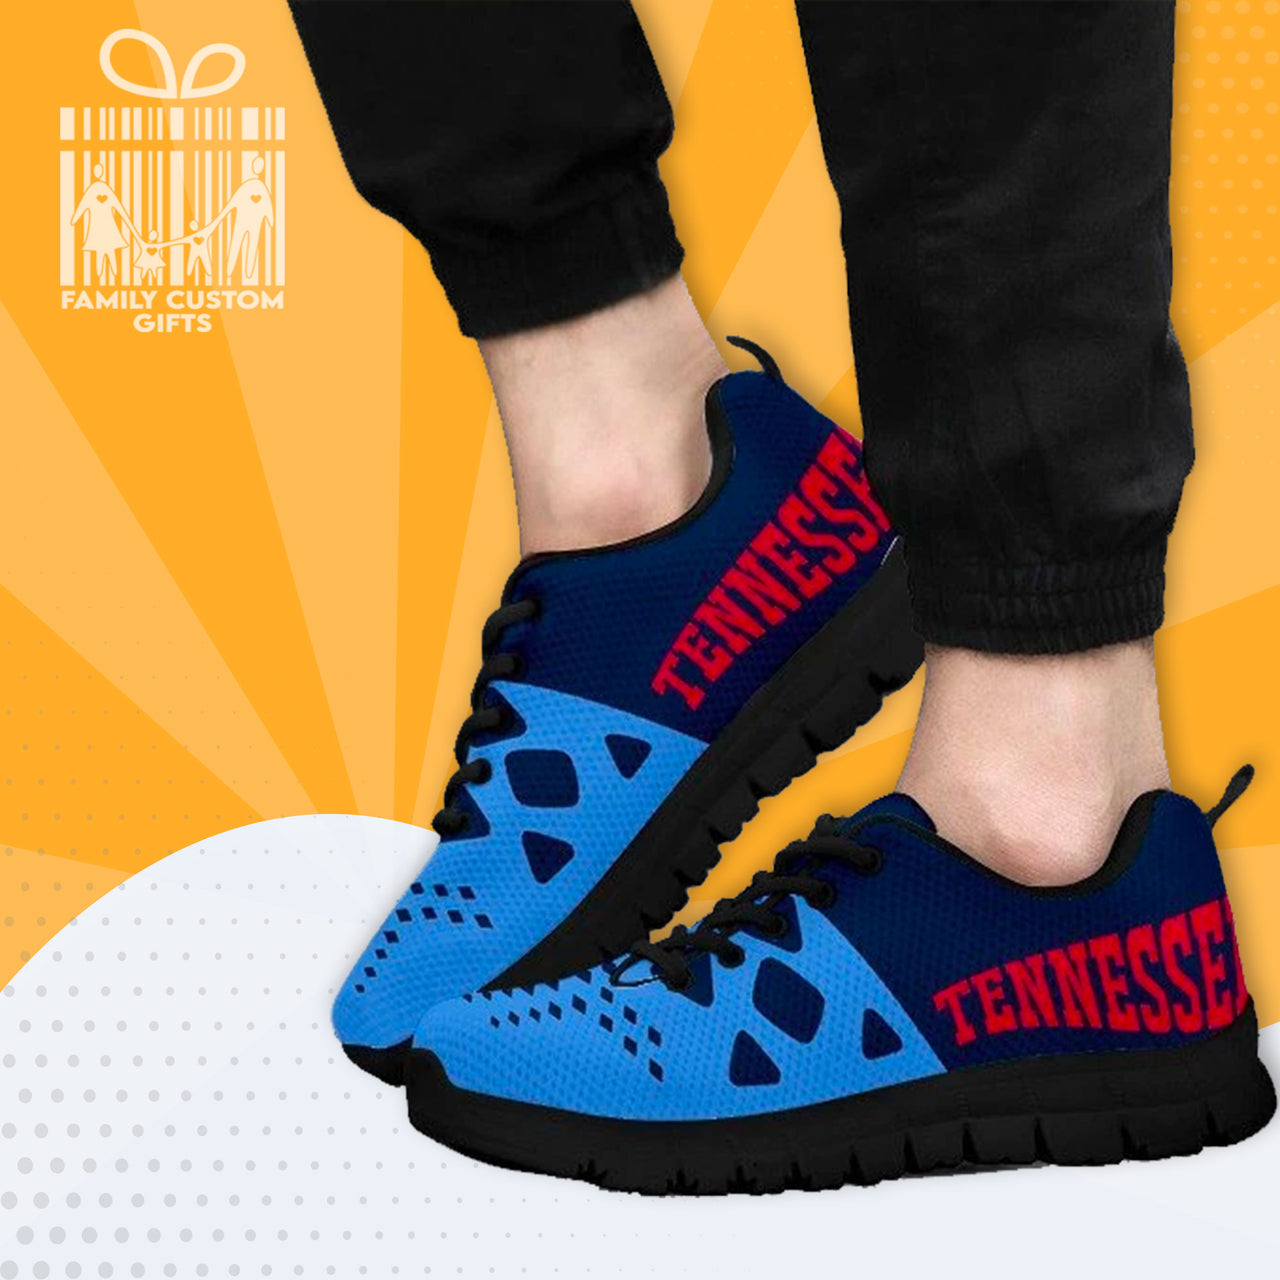 Tennessee Custom Shoes for Men Women 3D Print Fashion Sneaker Gifts for Her Him